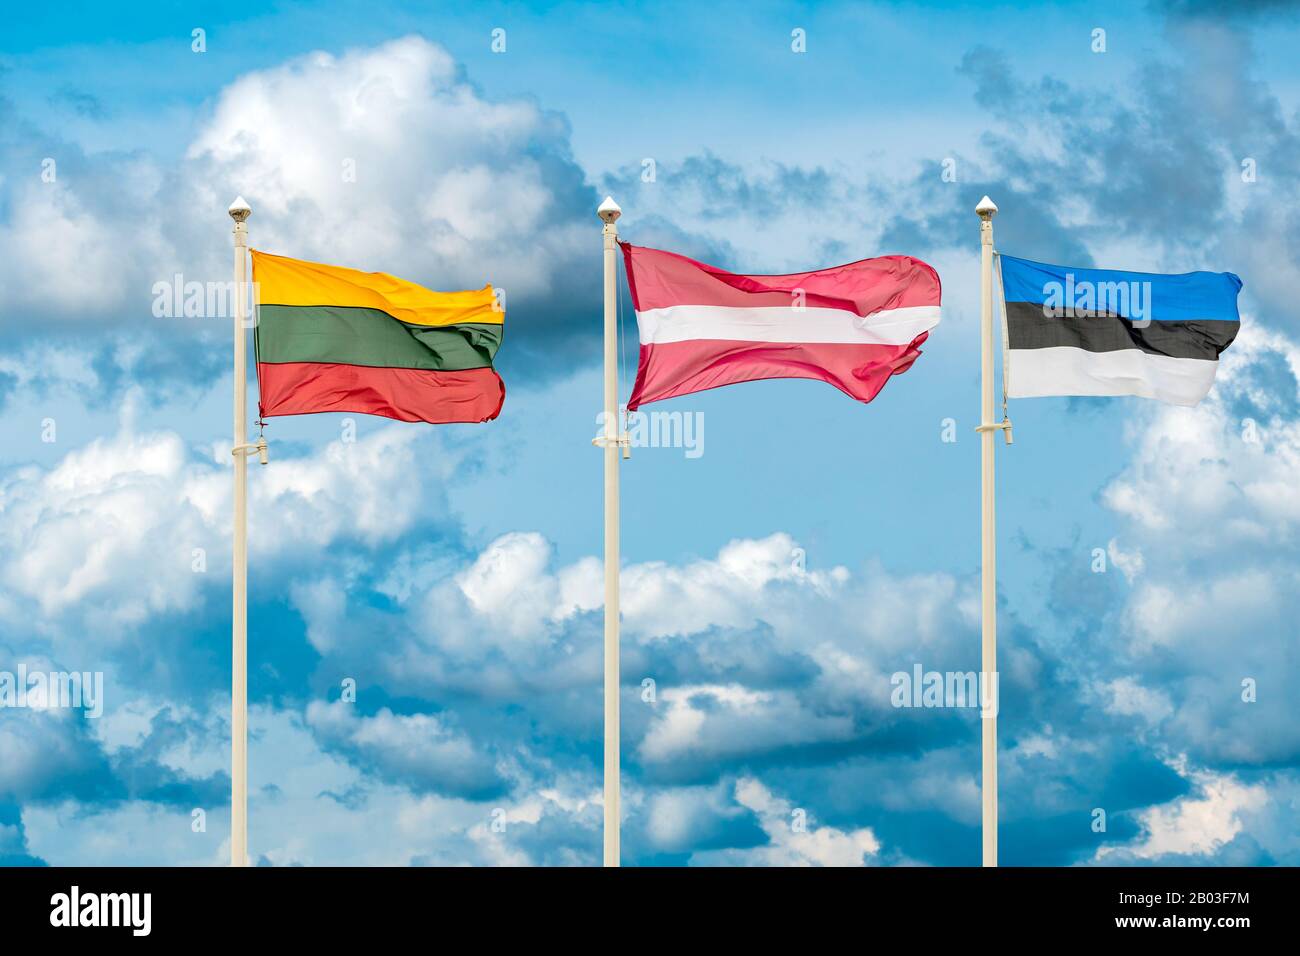 Flags of the Lithuania, Latvia and Estonia. Flags of the Baltic States waving on the sky background Stock Photo